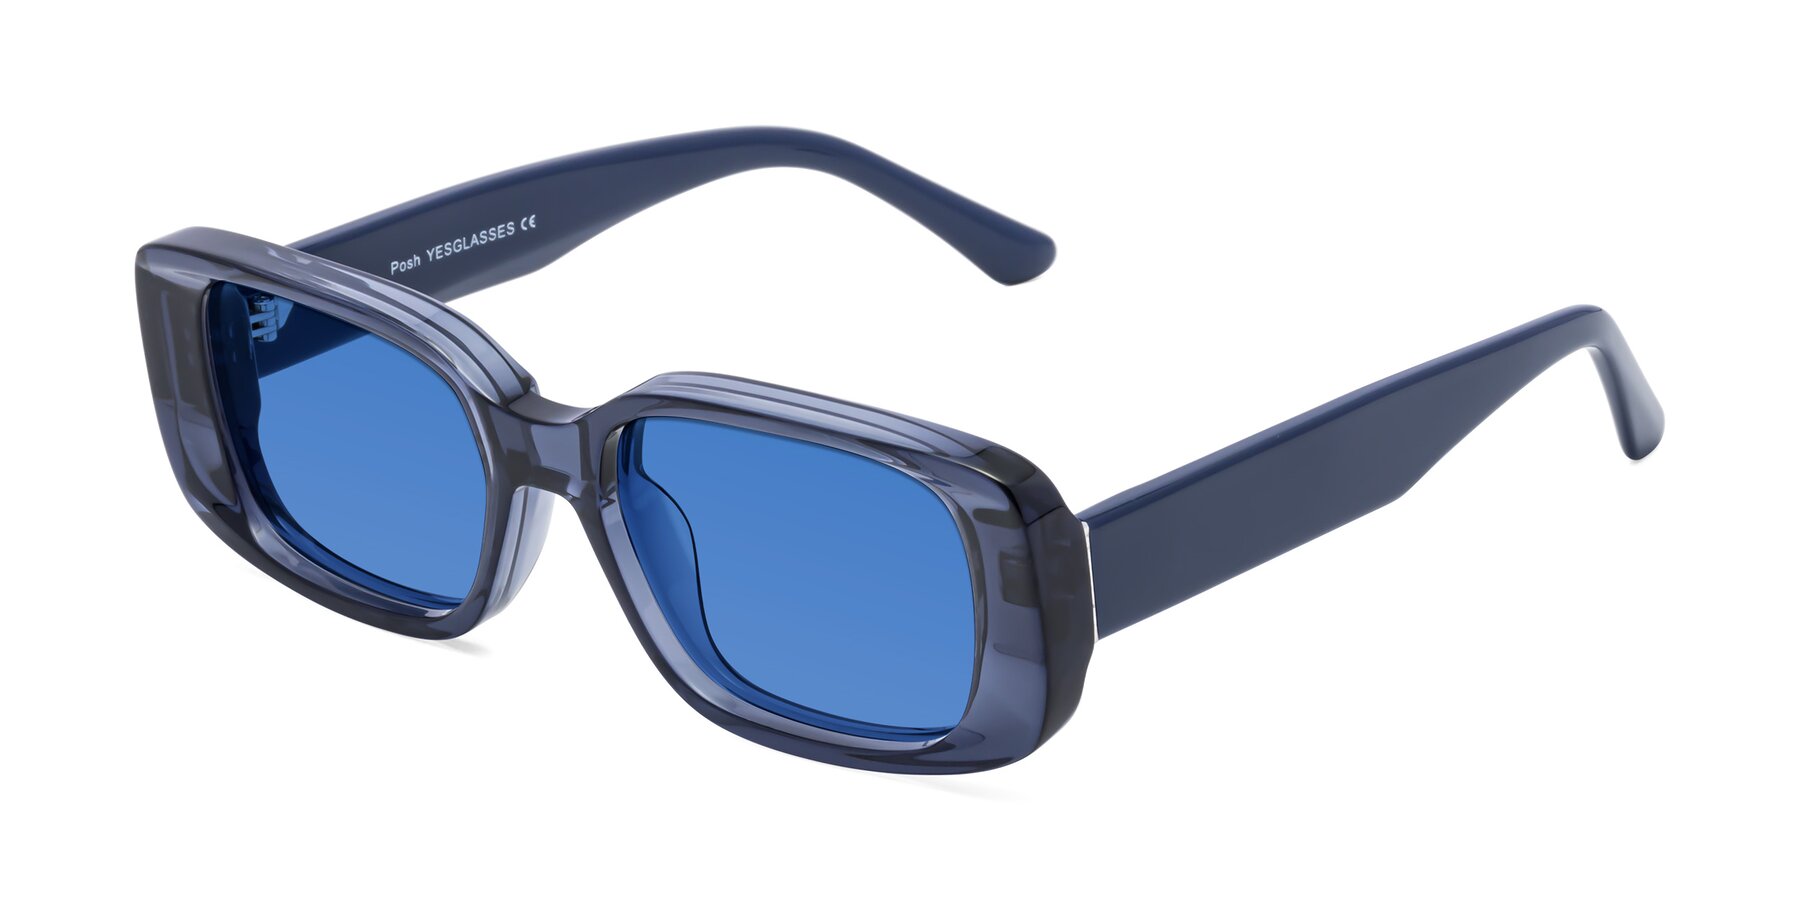 Angle of Posh in Translucent Blue with Blue Tinted Lenses